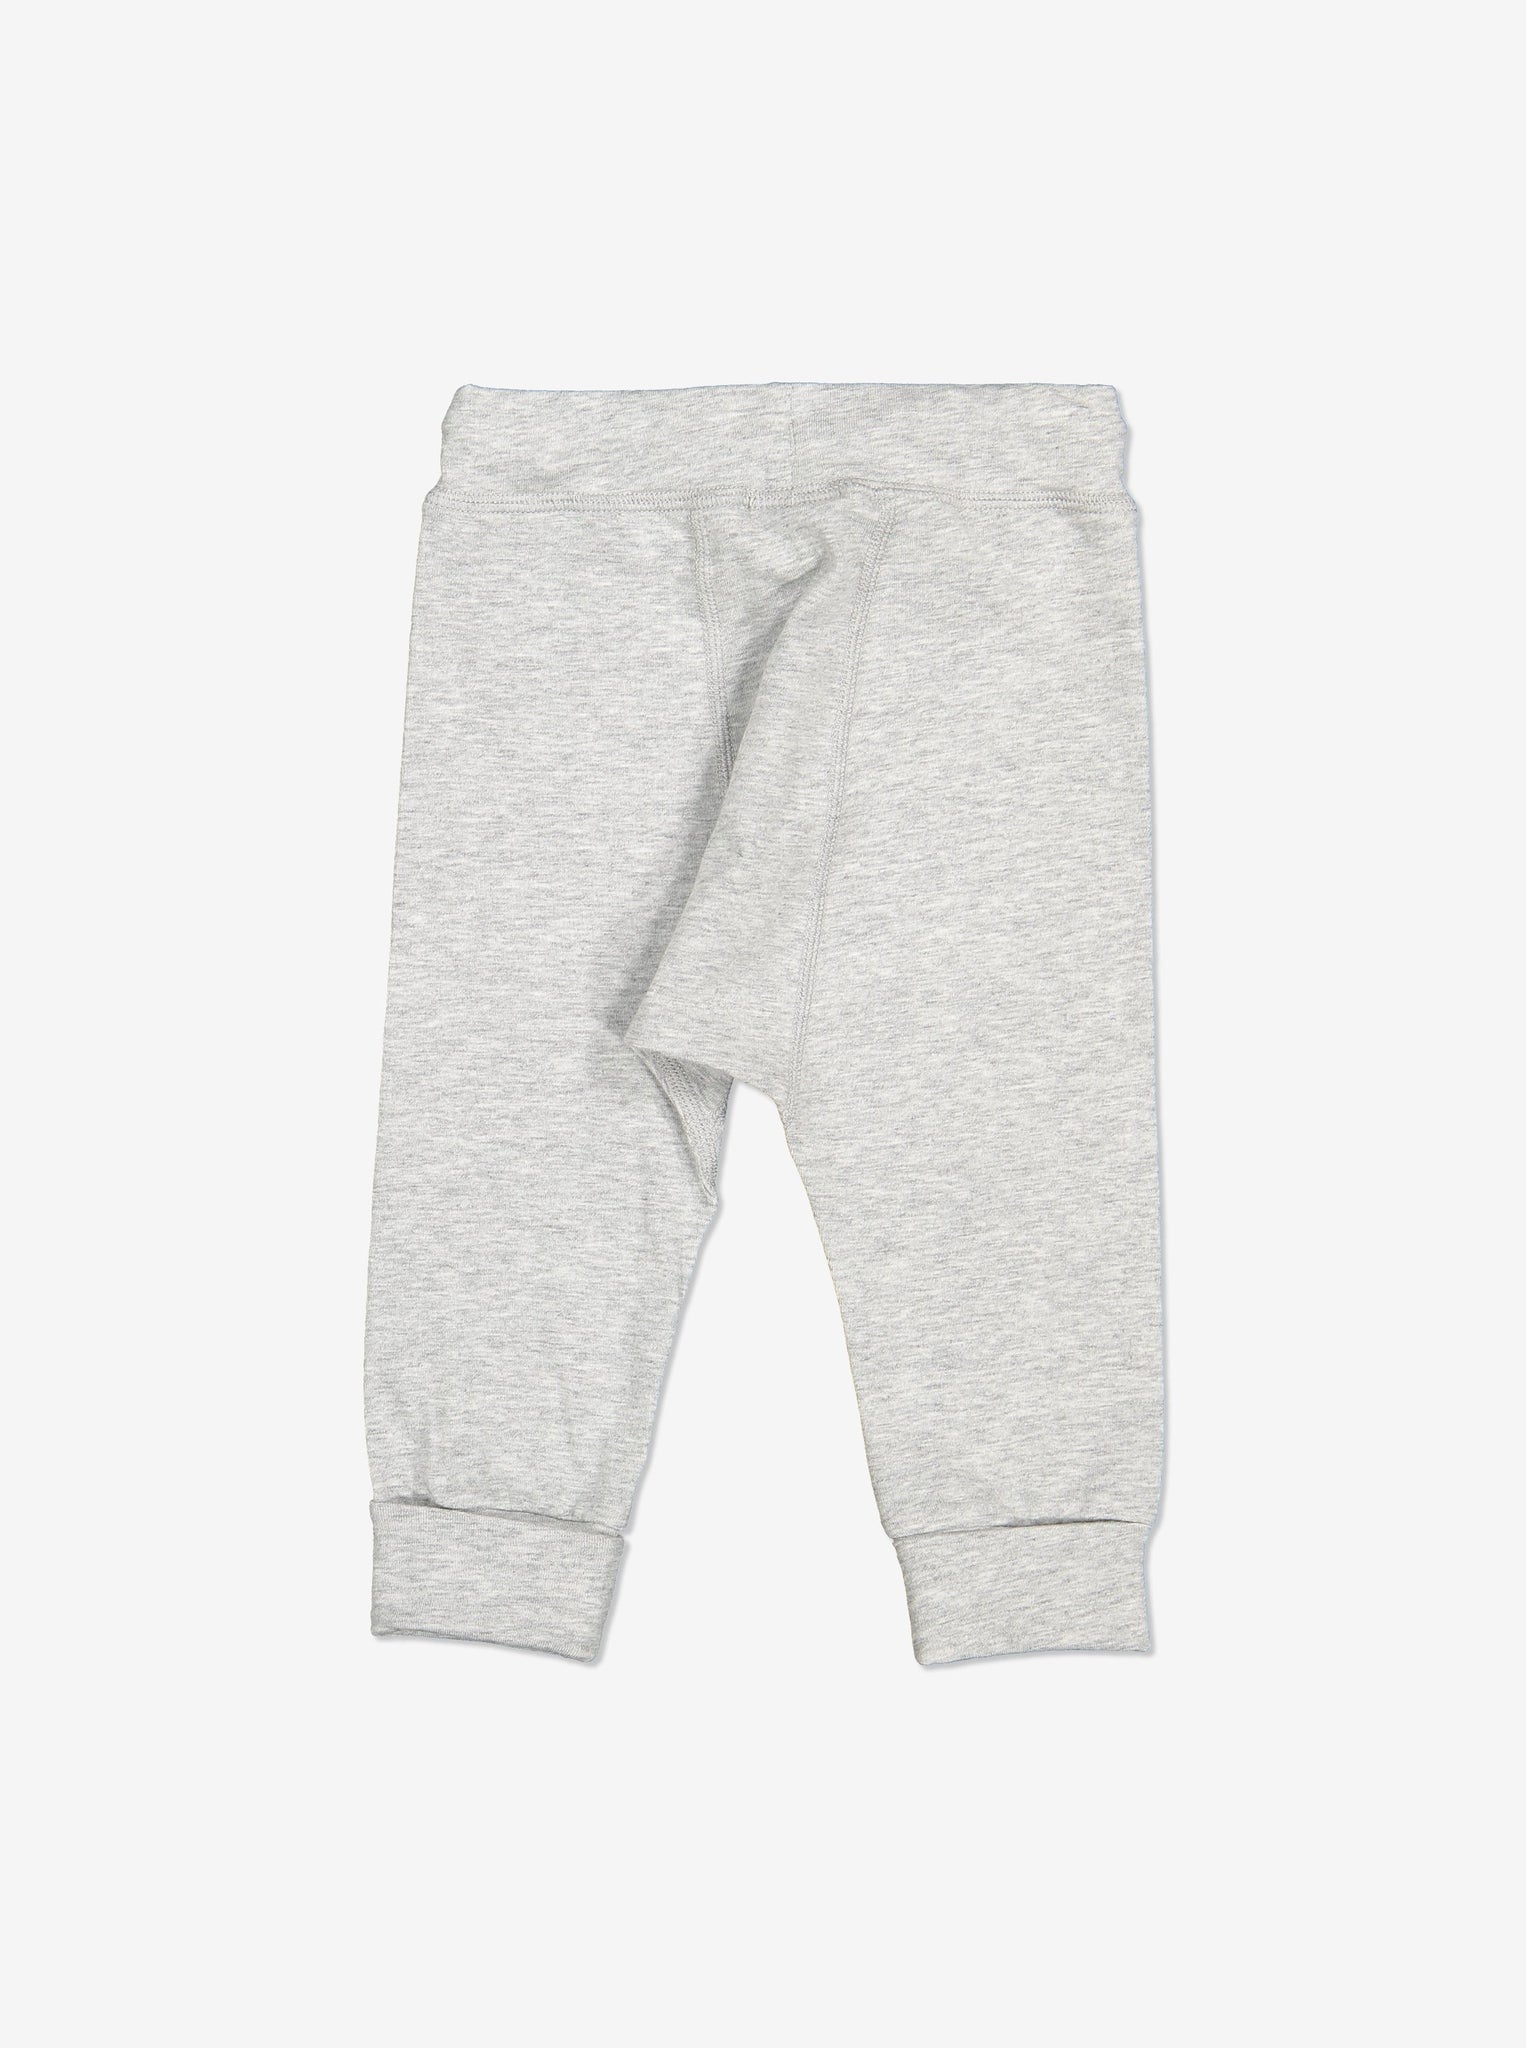 Soft Baby Trousers-Unisex-0-1y-Grey